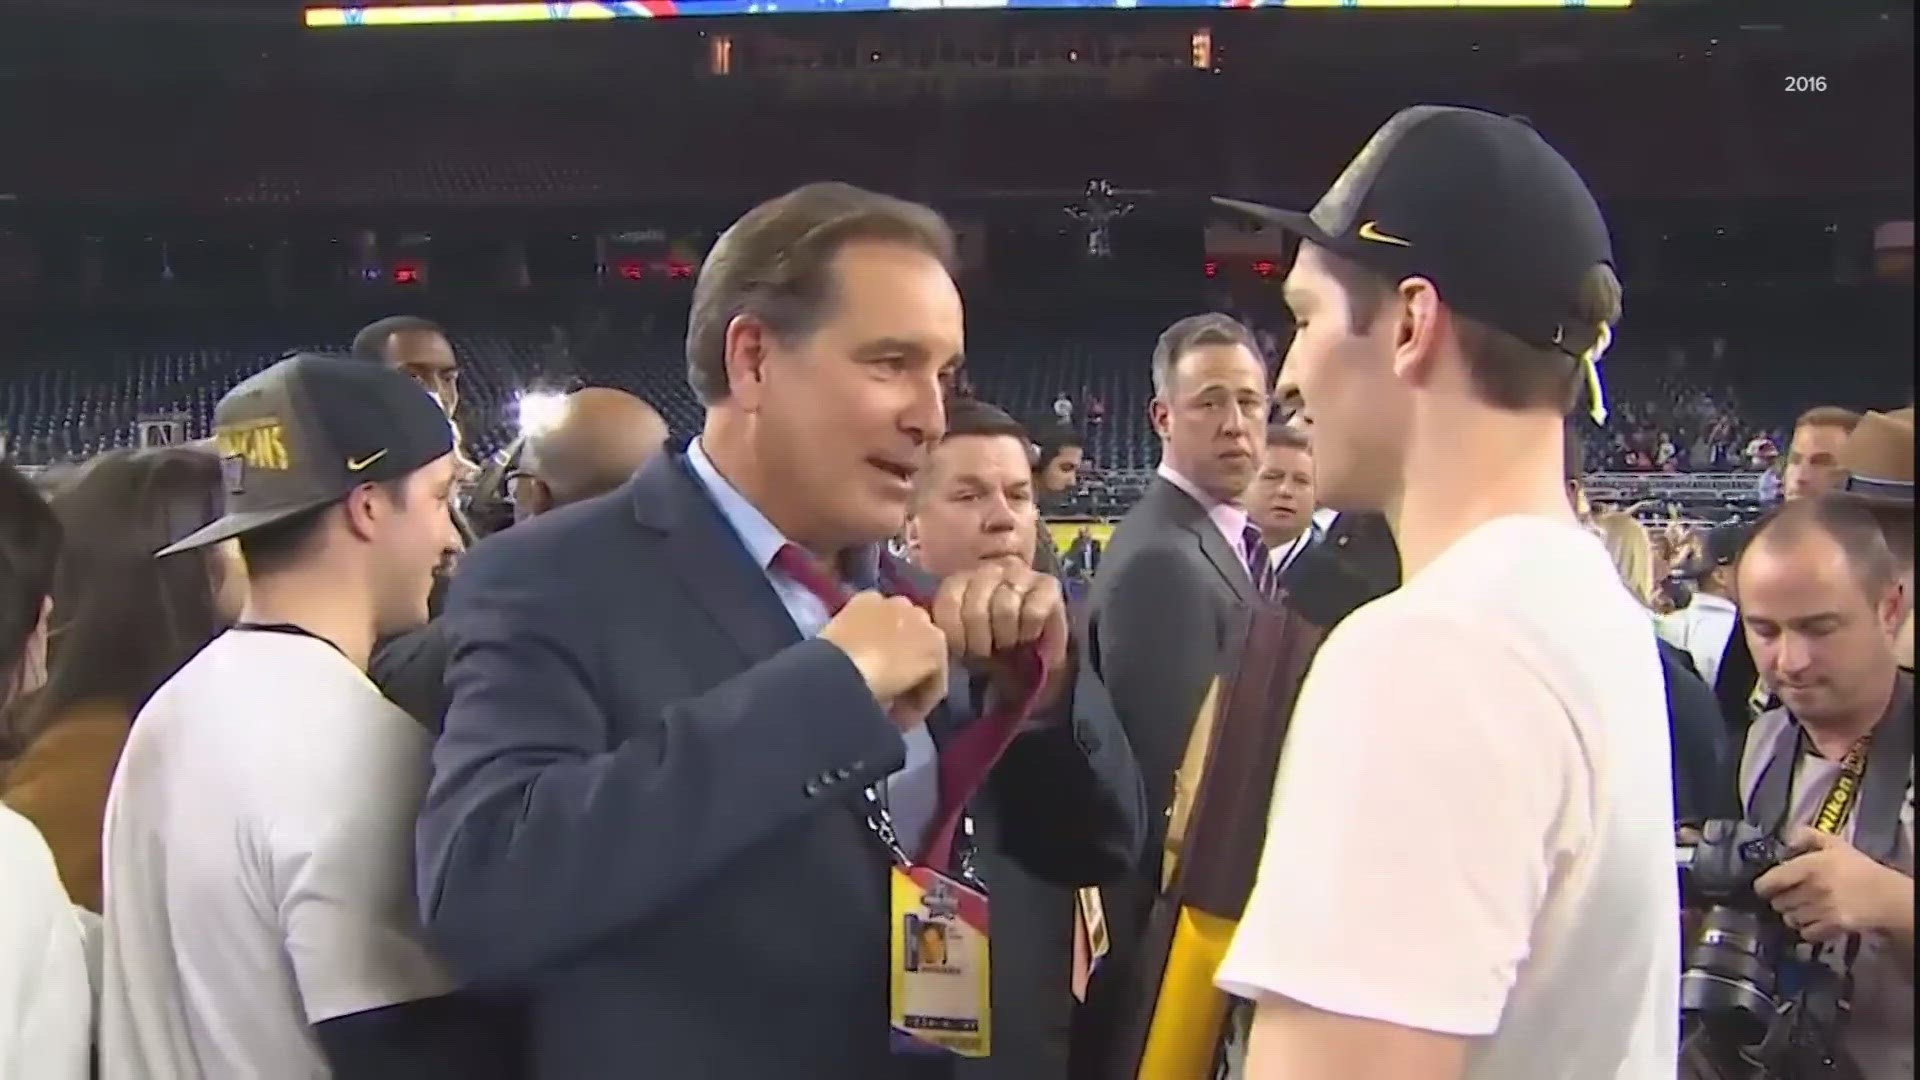 It's been a tradition for Jim Nantz to hand out a tie to an outstanding player in the game.